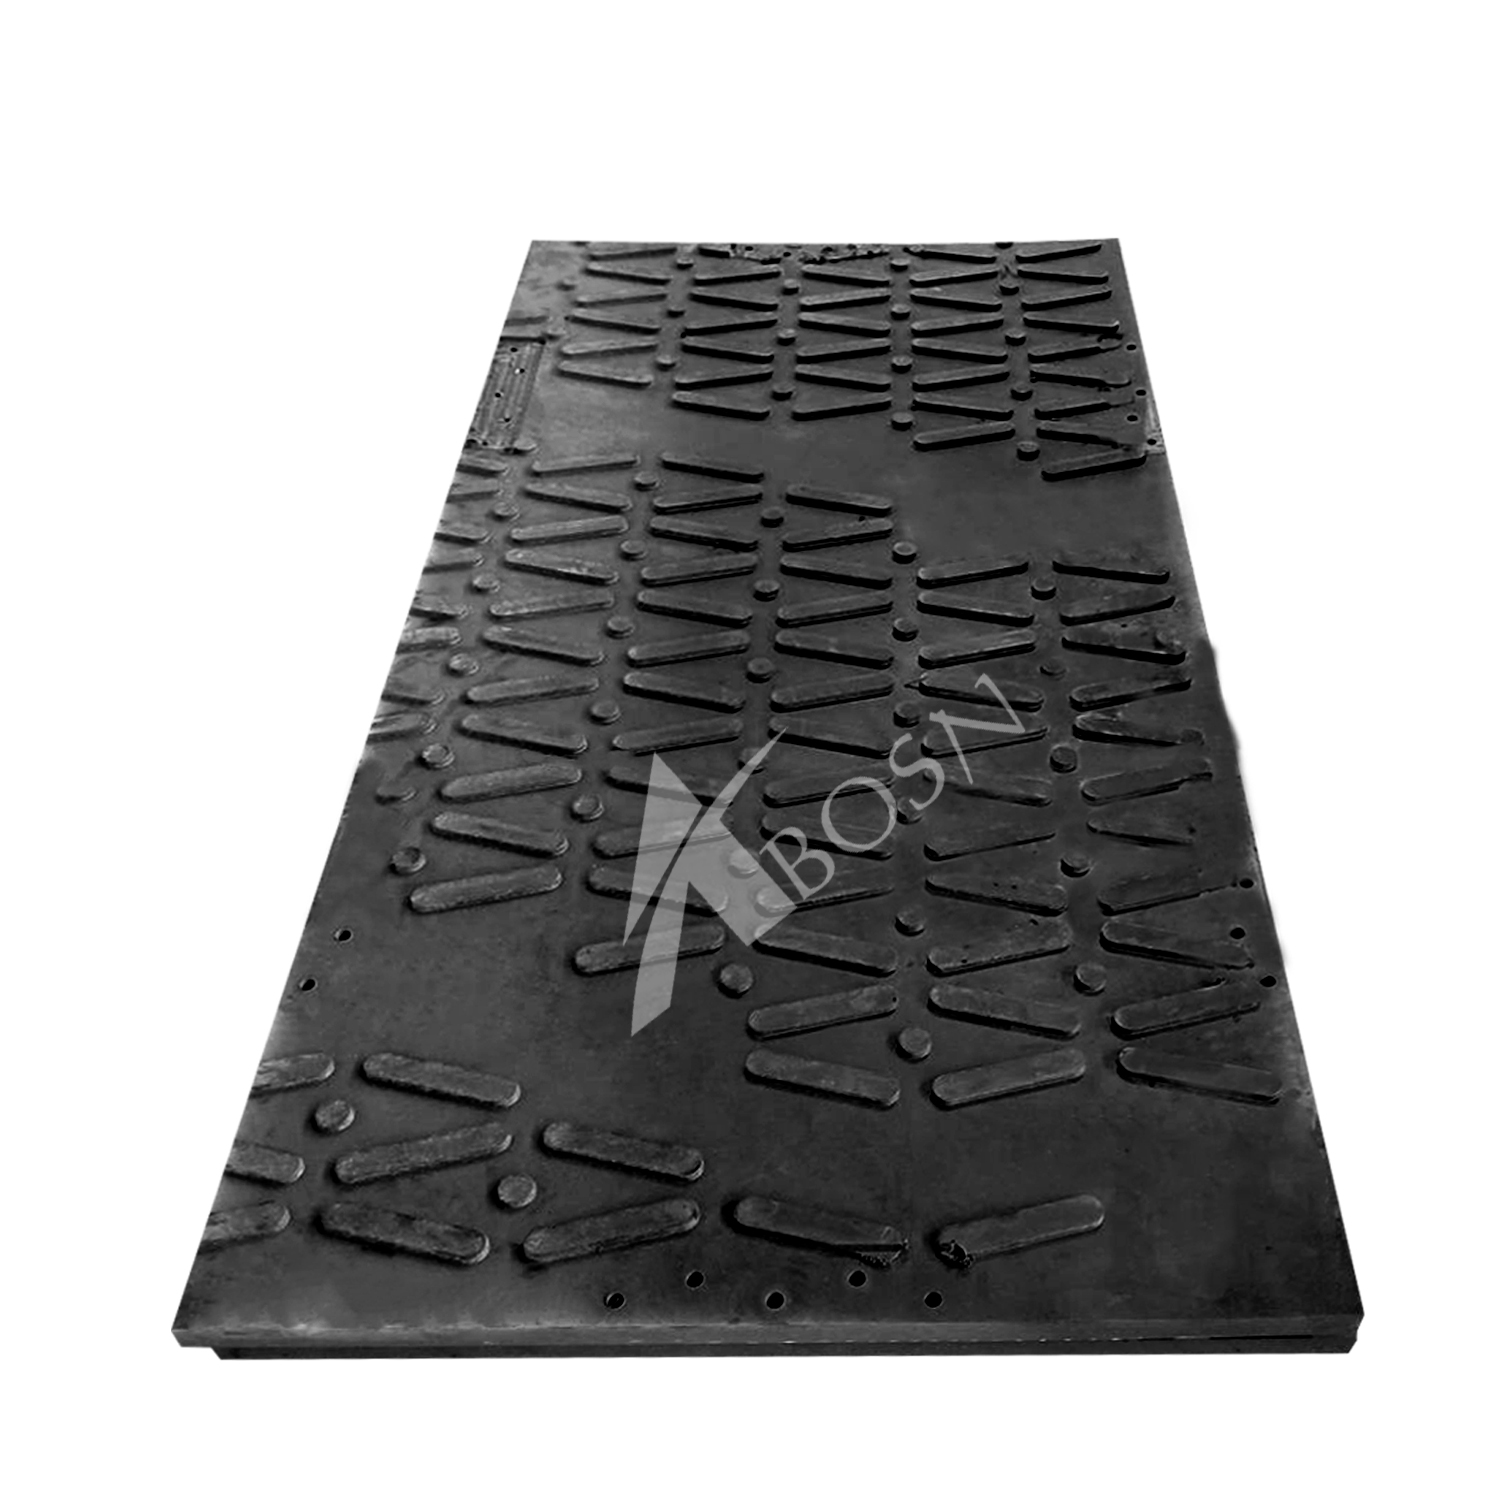 Ground Protection Track Mats Heavy Duty Construction Access Road Mats